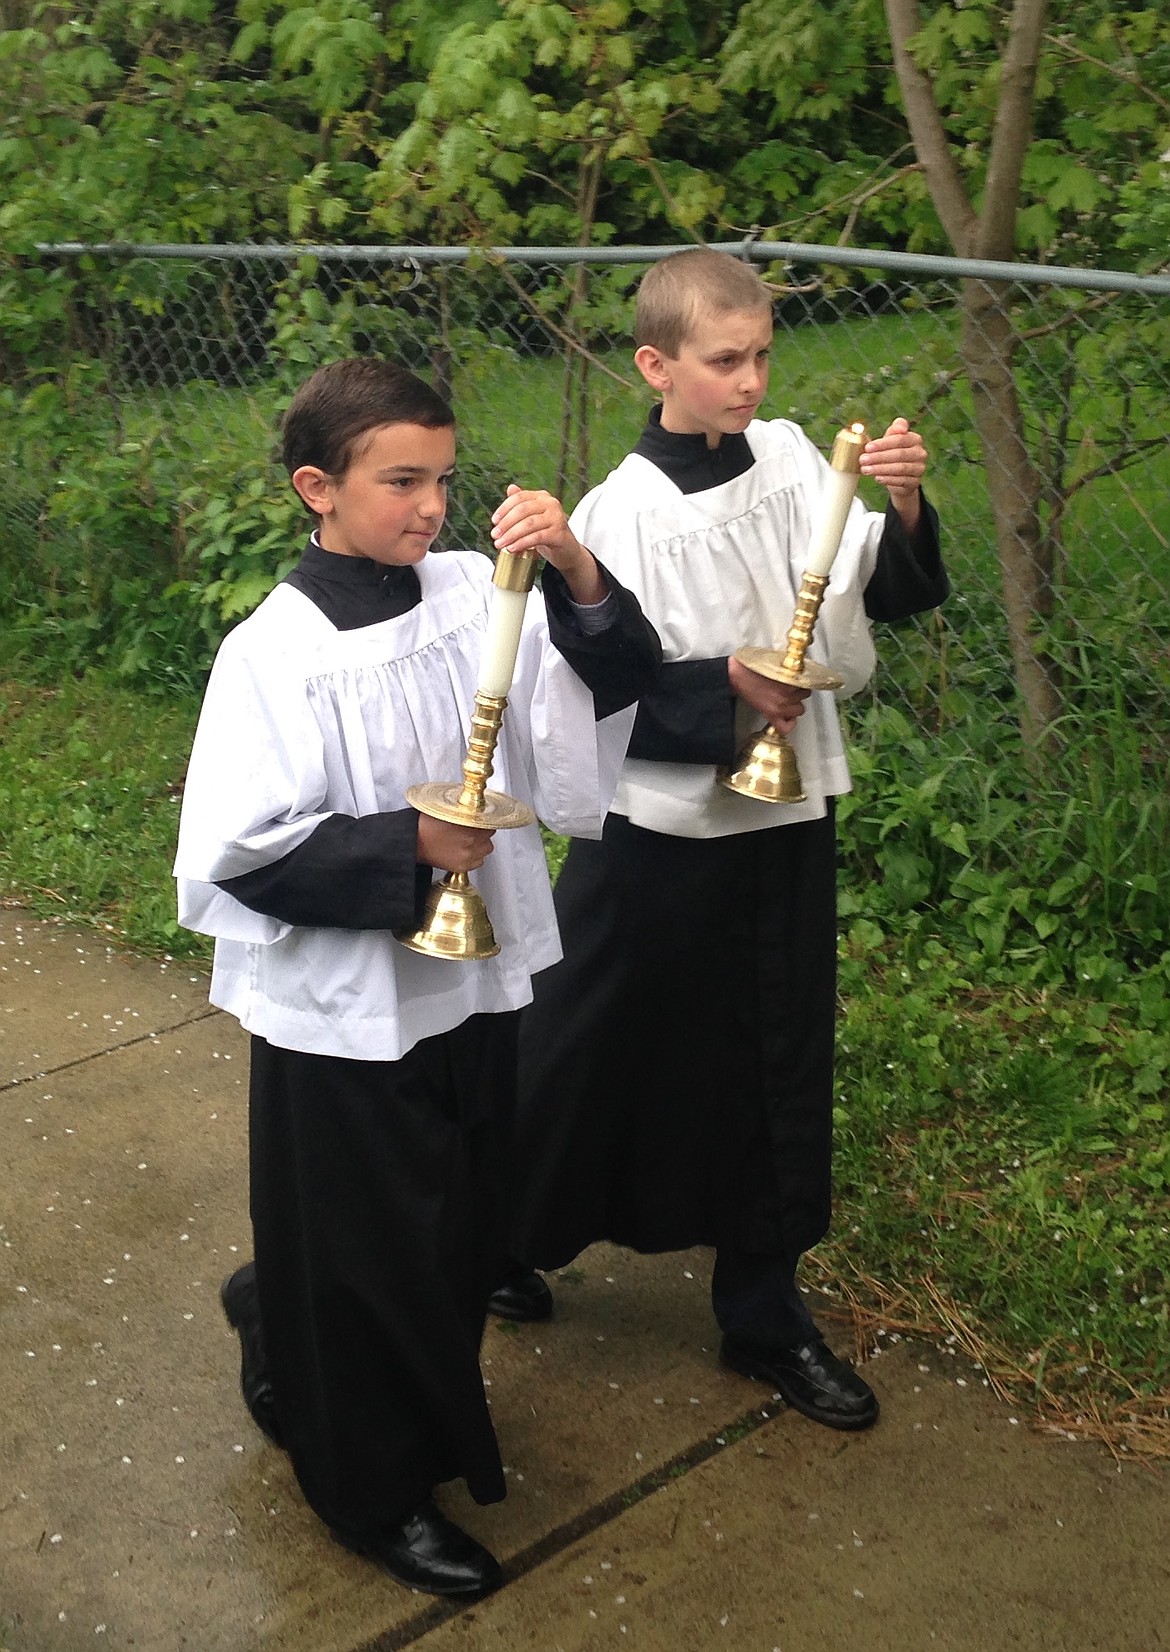 JASON ELLIOTT/Press
Toby Guatamini, left, and Thomas Perry, attempt to fight off the rain and keep their candles lit during the St. Stanislaus' Catholic Churches Our Lady of Fatima procession on Sunday in Rathdrum.